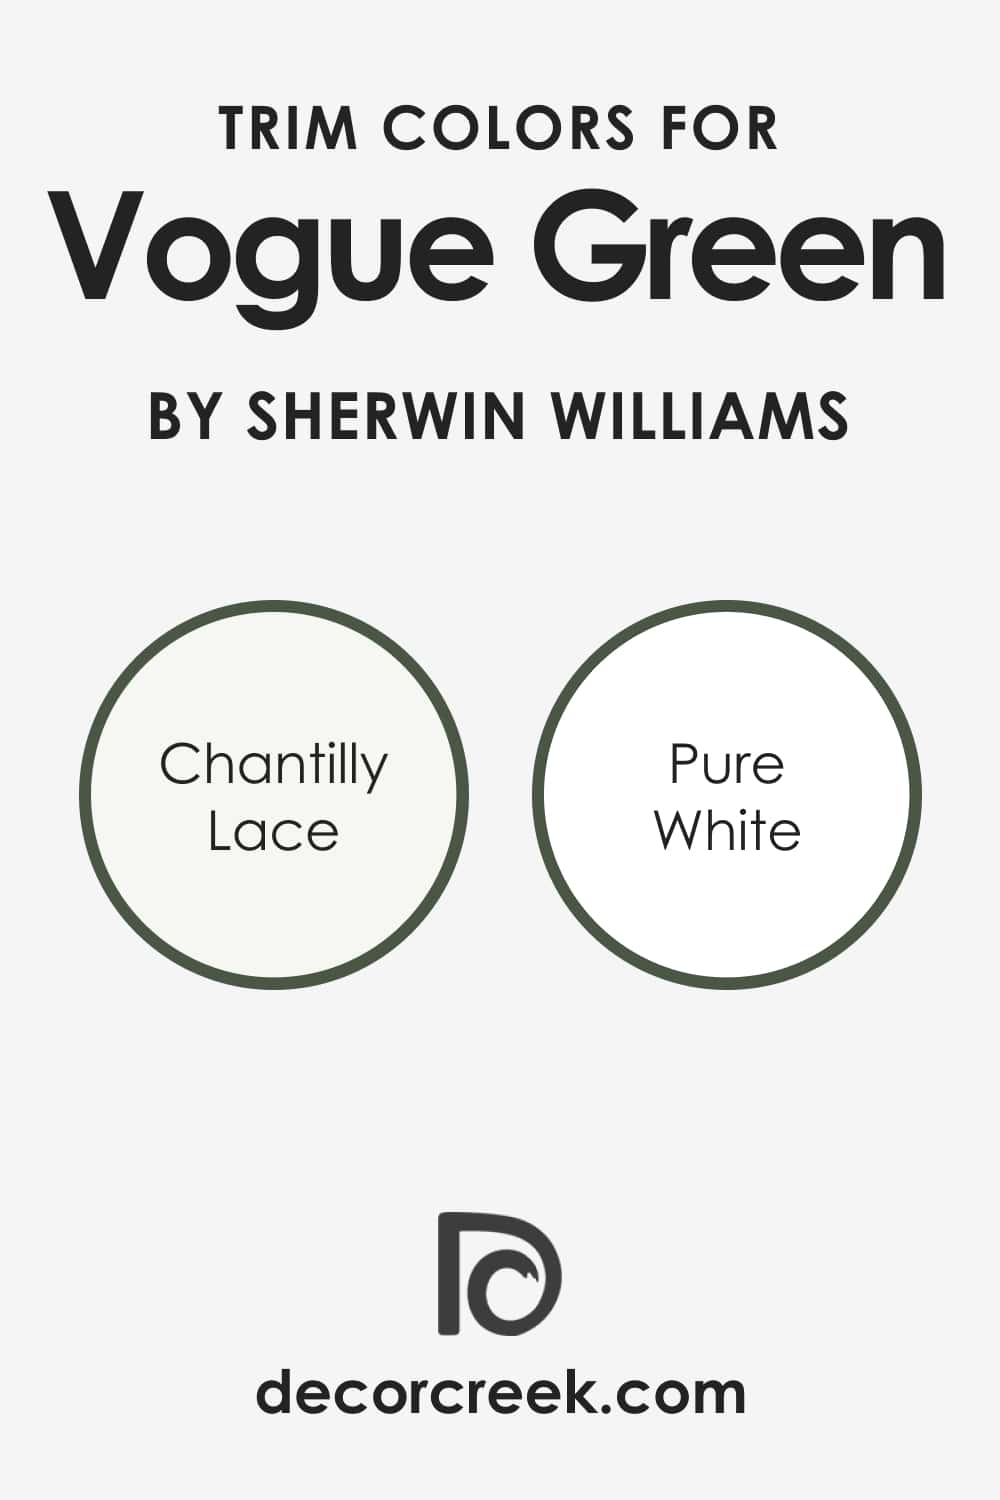 What’s the Best Trim Color For SW Vogue Green?